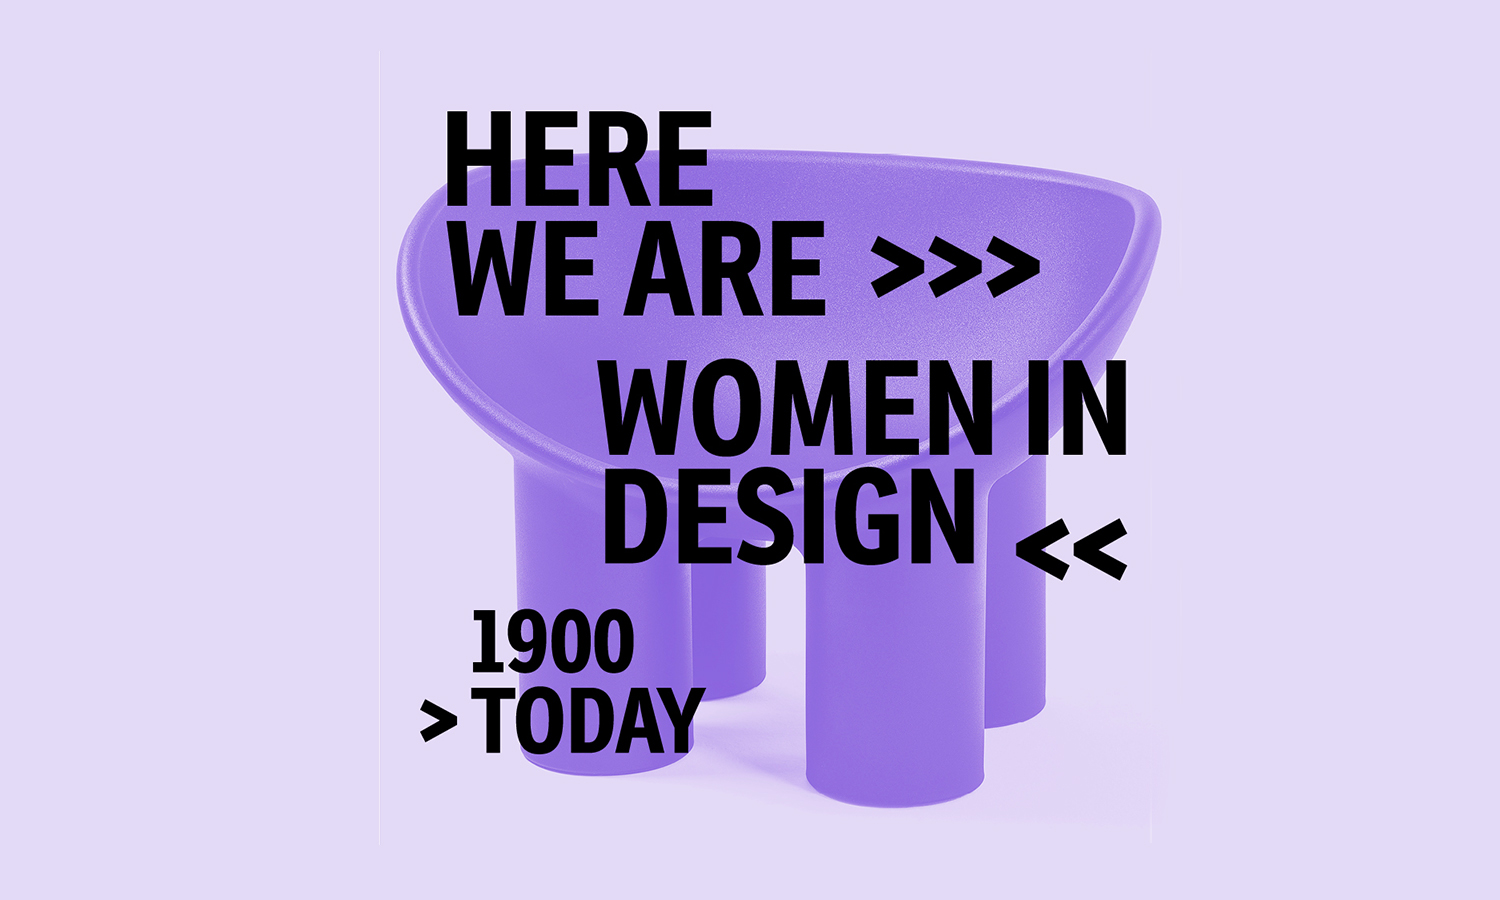 VITRA DESIGN MUSEUM / HERE WE ARE / WOMEN IN DESIGN 1900-TODAY